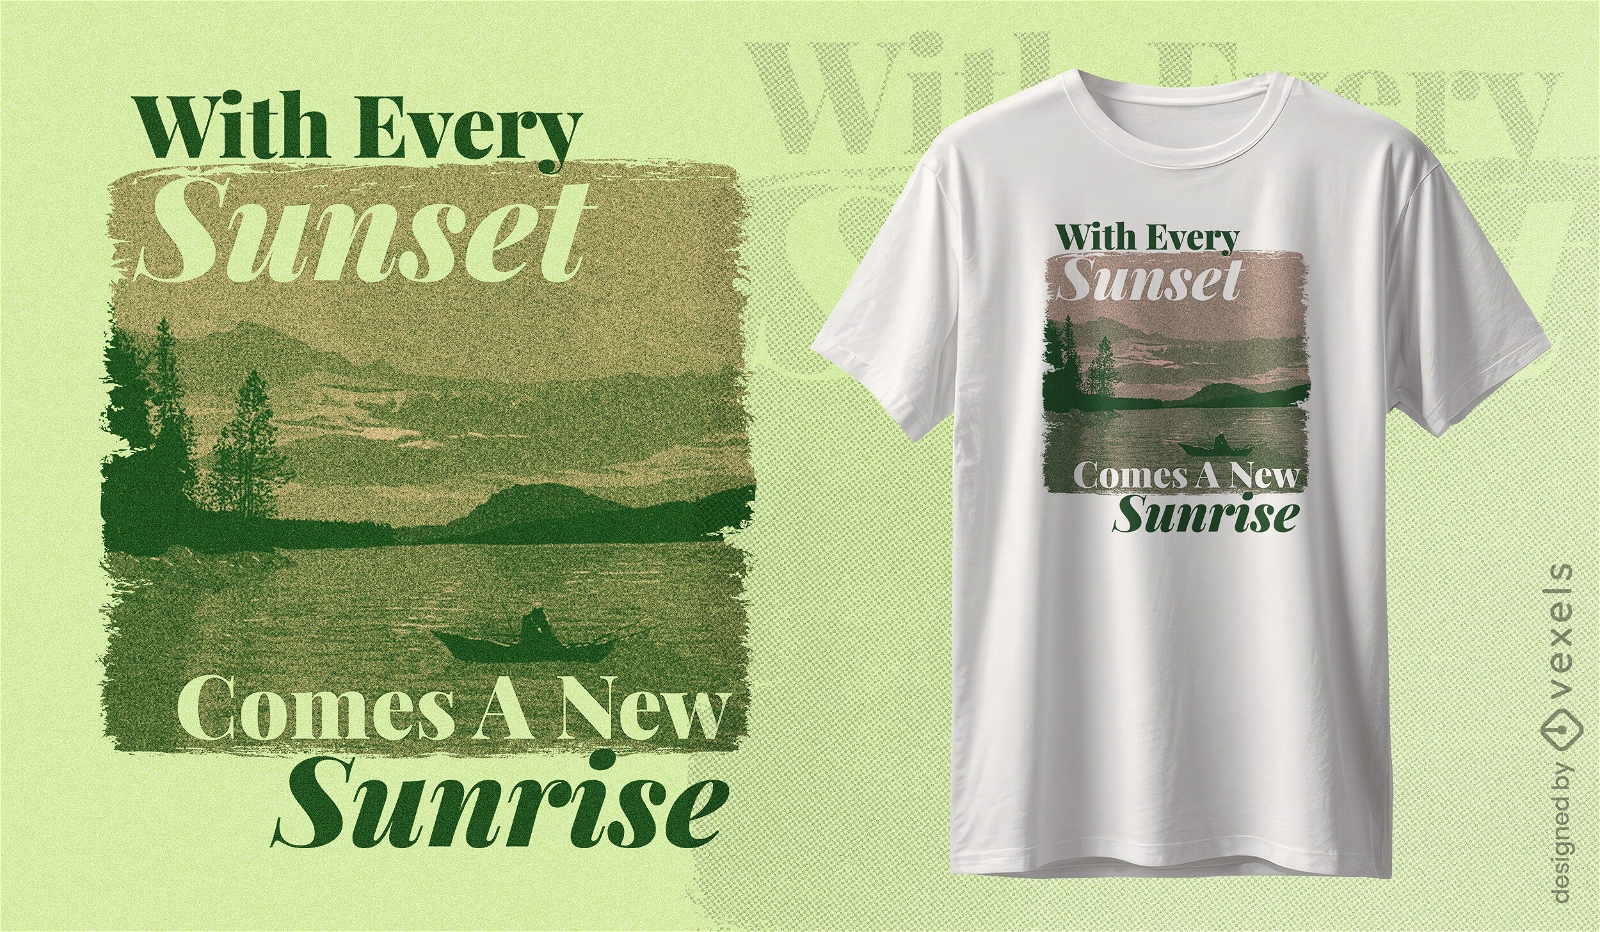 Sunset and sunrise quote t-shirt design